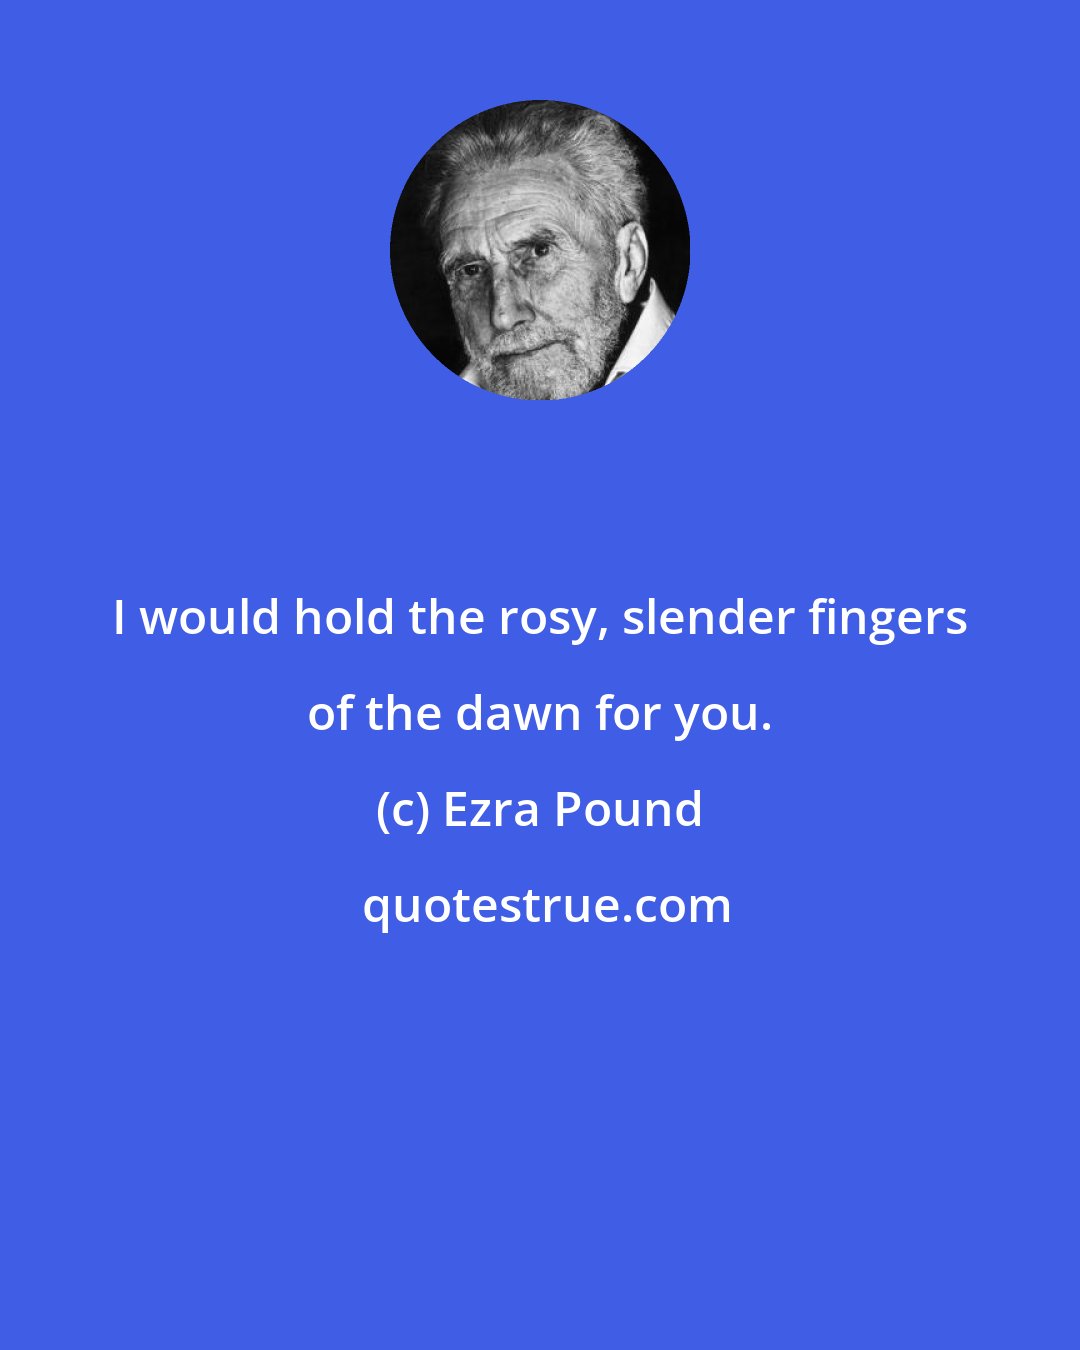 Ezra Pound: I would hold the rosy, slender fingers of the dawn for you.